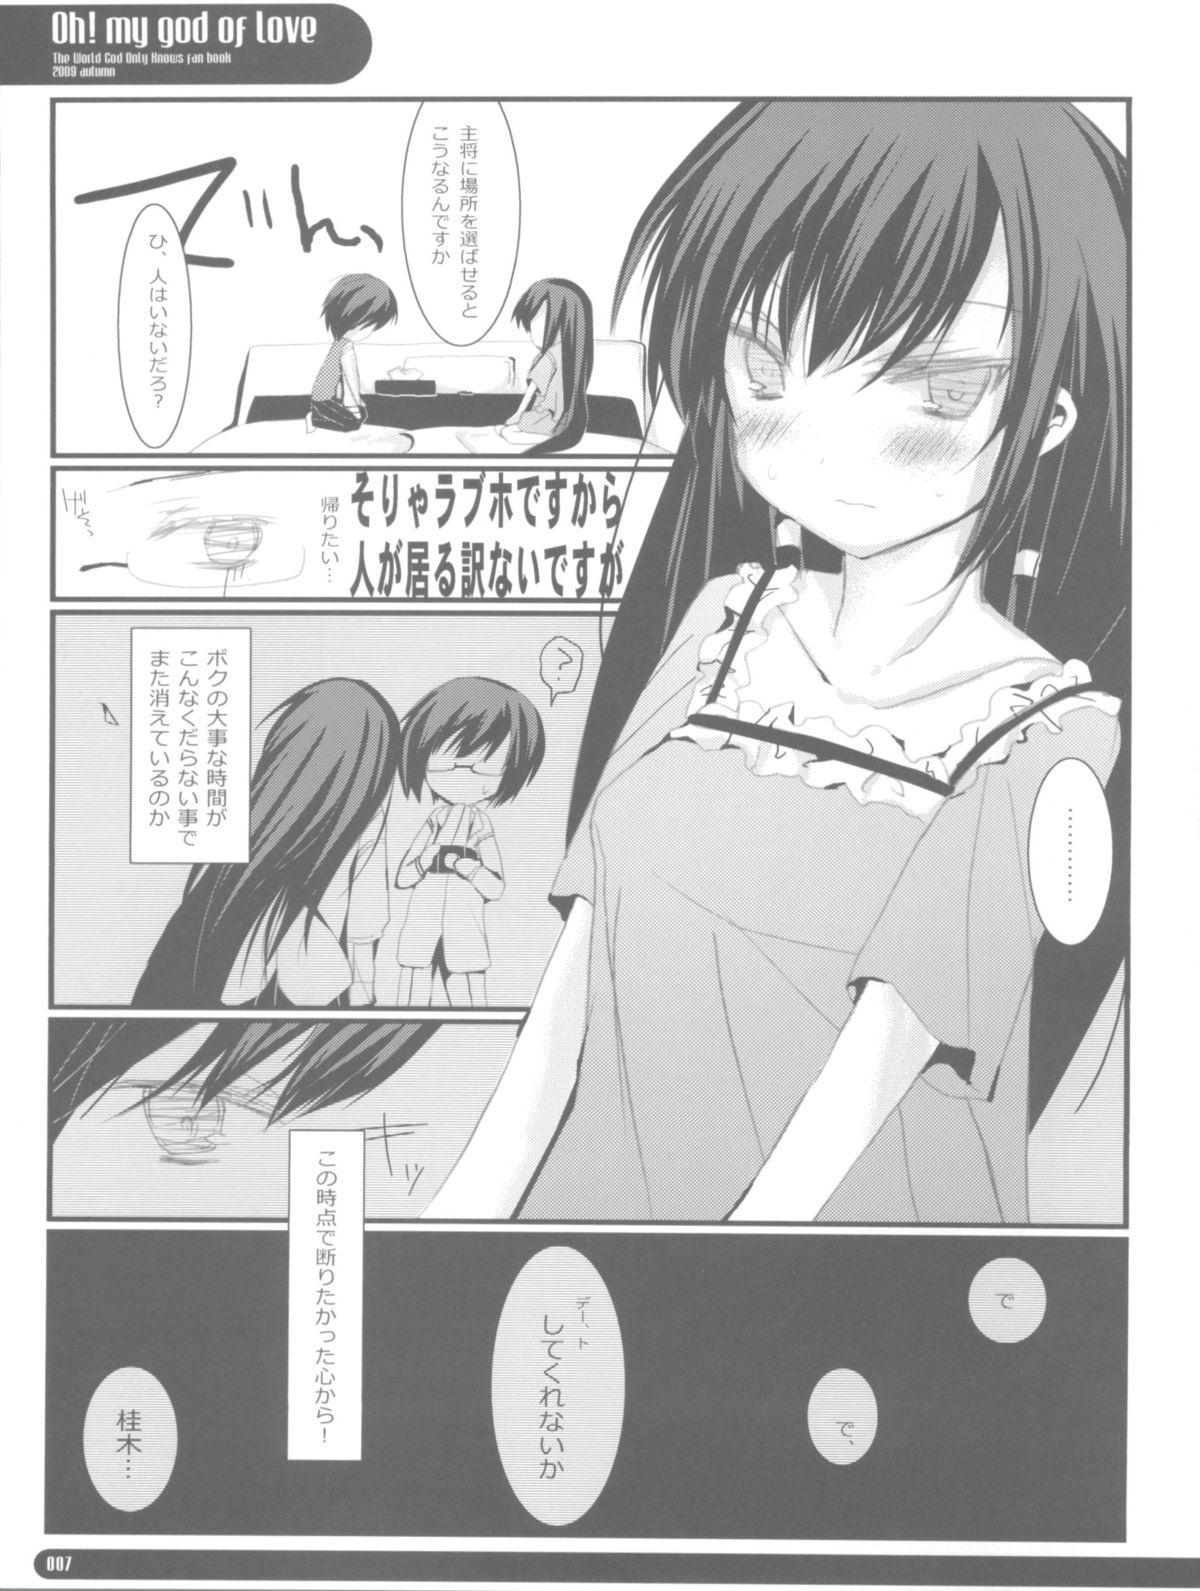 Vagina OH!MY GOD OF LOVE - The world god only knows Toes - Page 7